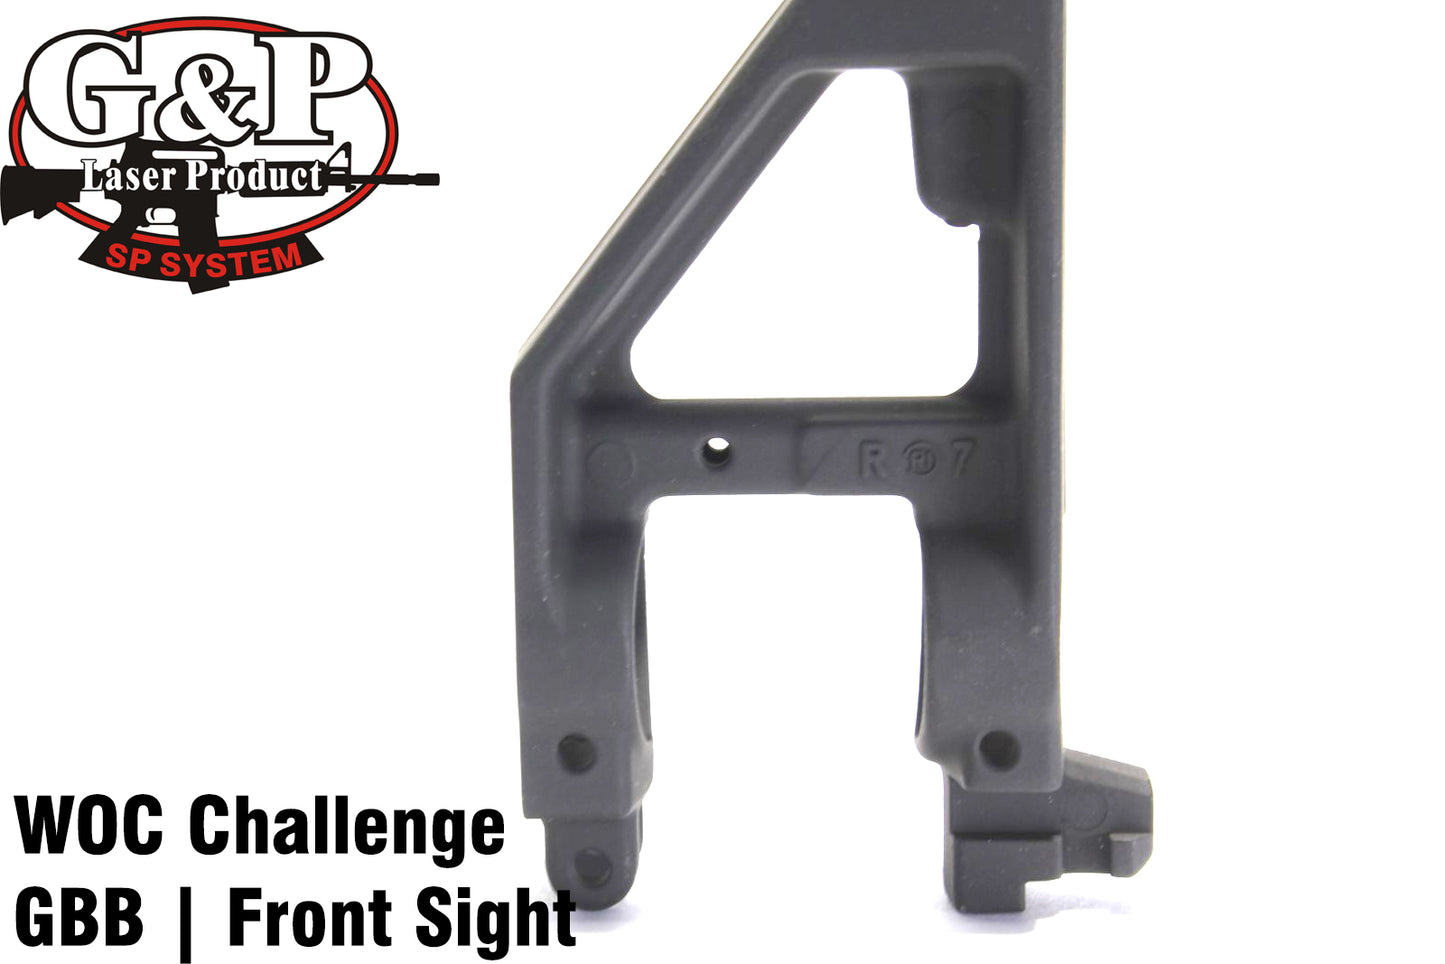 G&P Licensed Magpul PTS GBB Front Sight